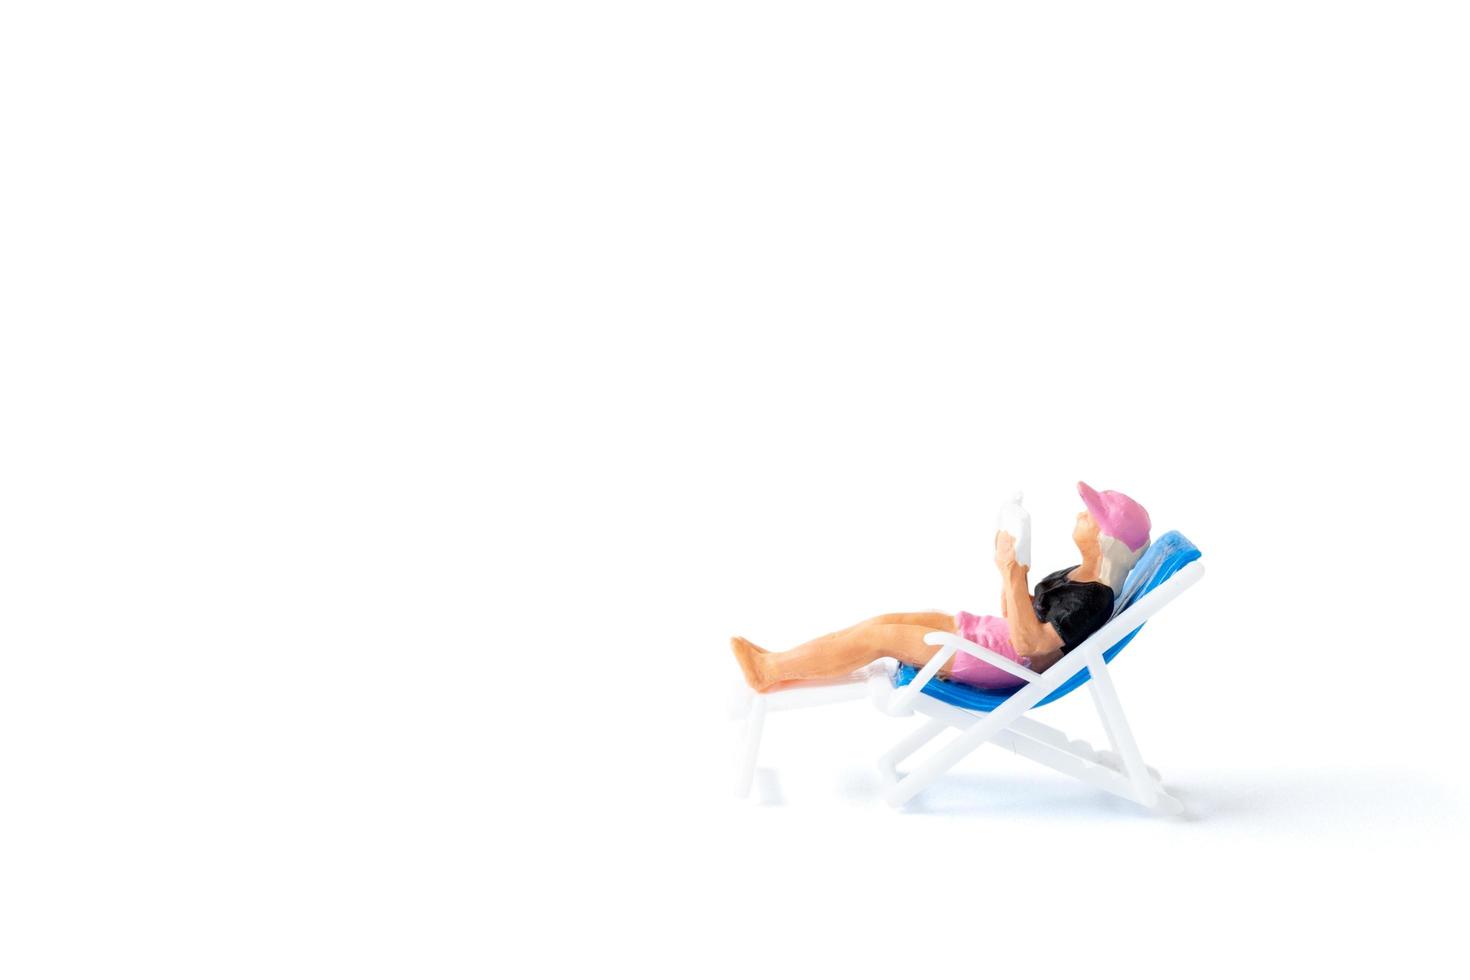 Miniature person sunbathing on a deck chair on a white background, summertime concept photo